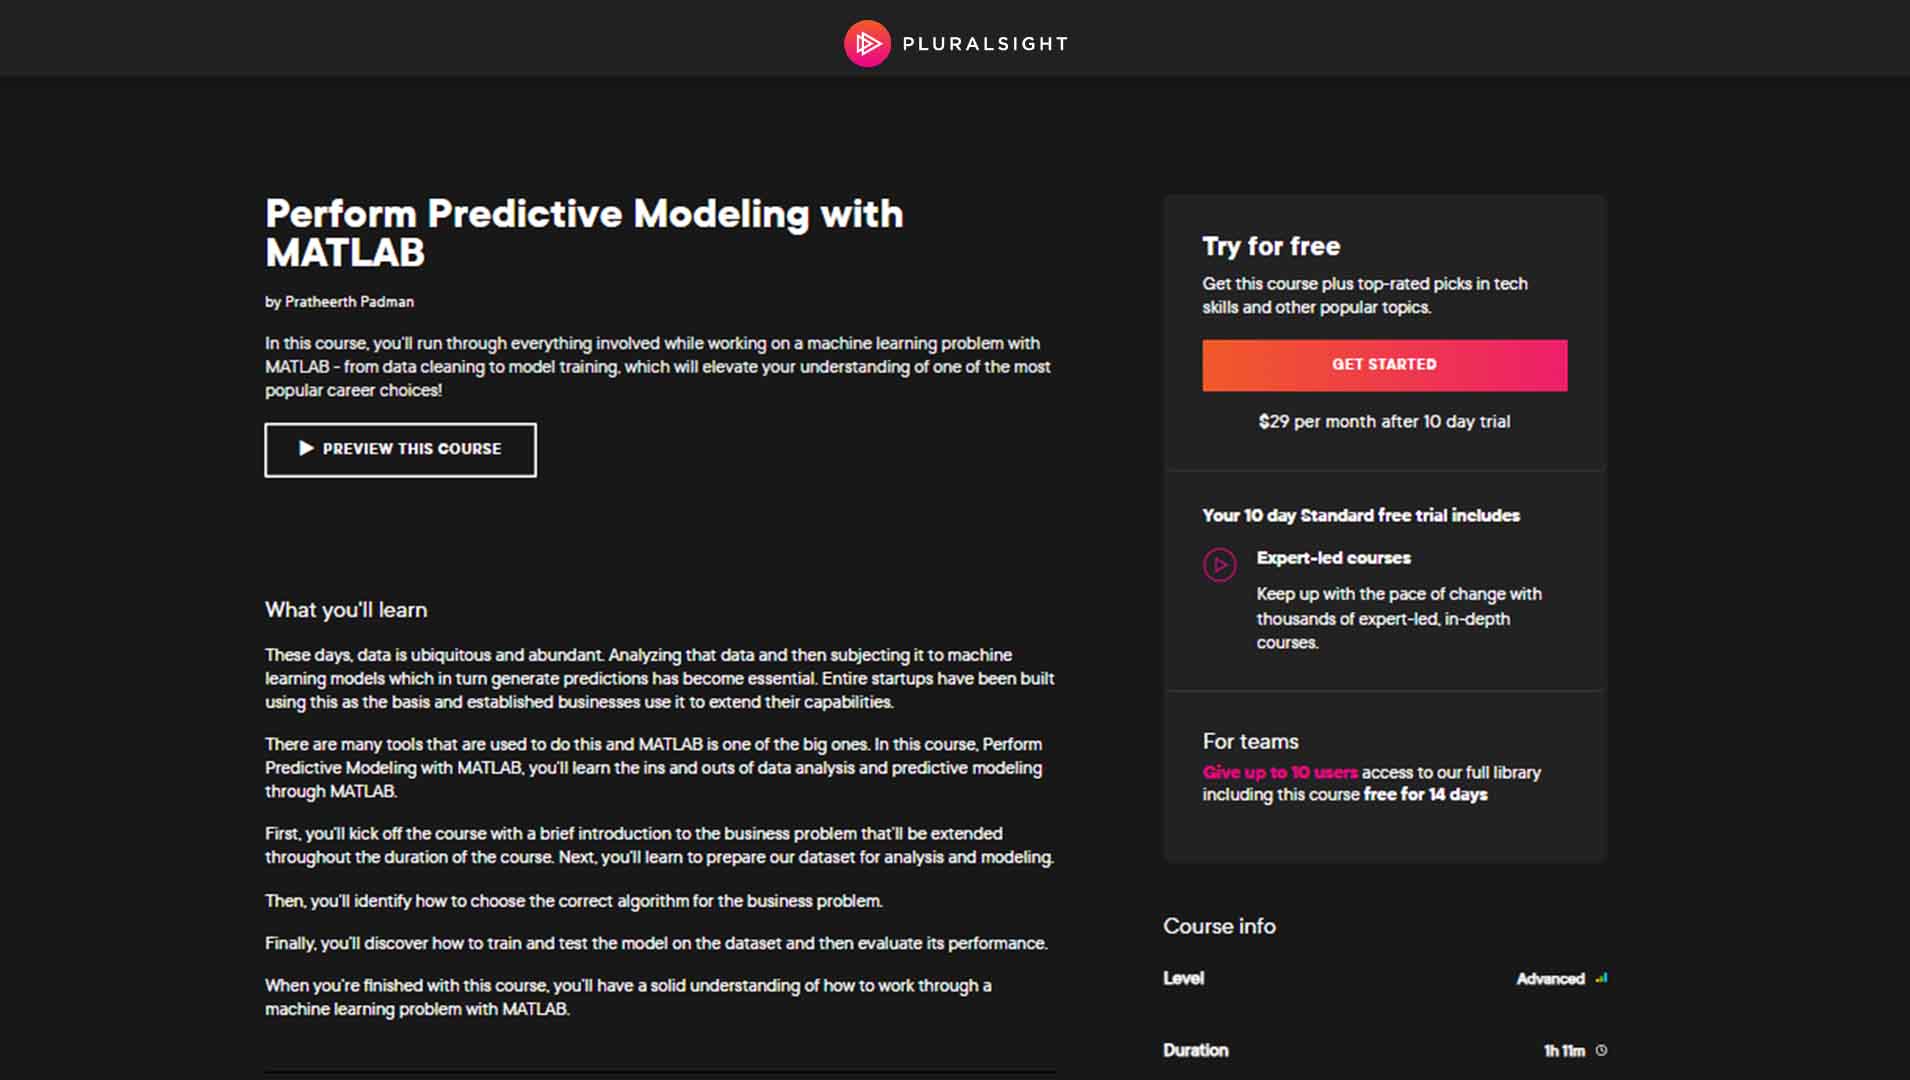 Perform Predictive Modeling with MATLAB